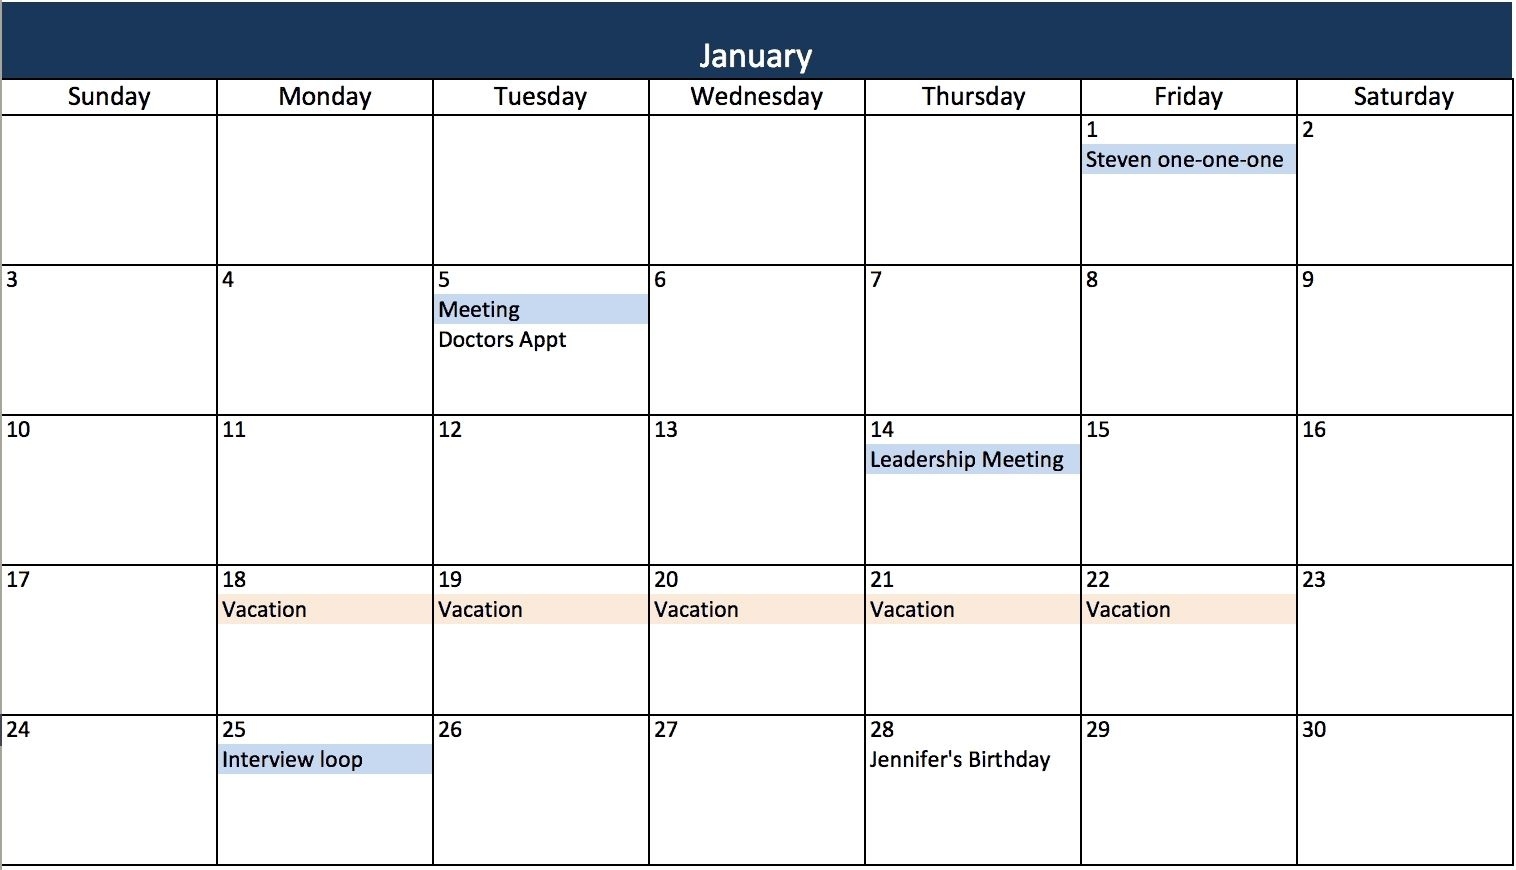 Calendar Template With Recurring Events Free, Printable Calendar Template With Recurring Events